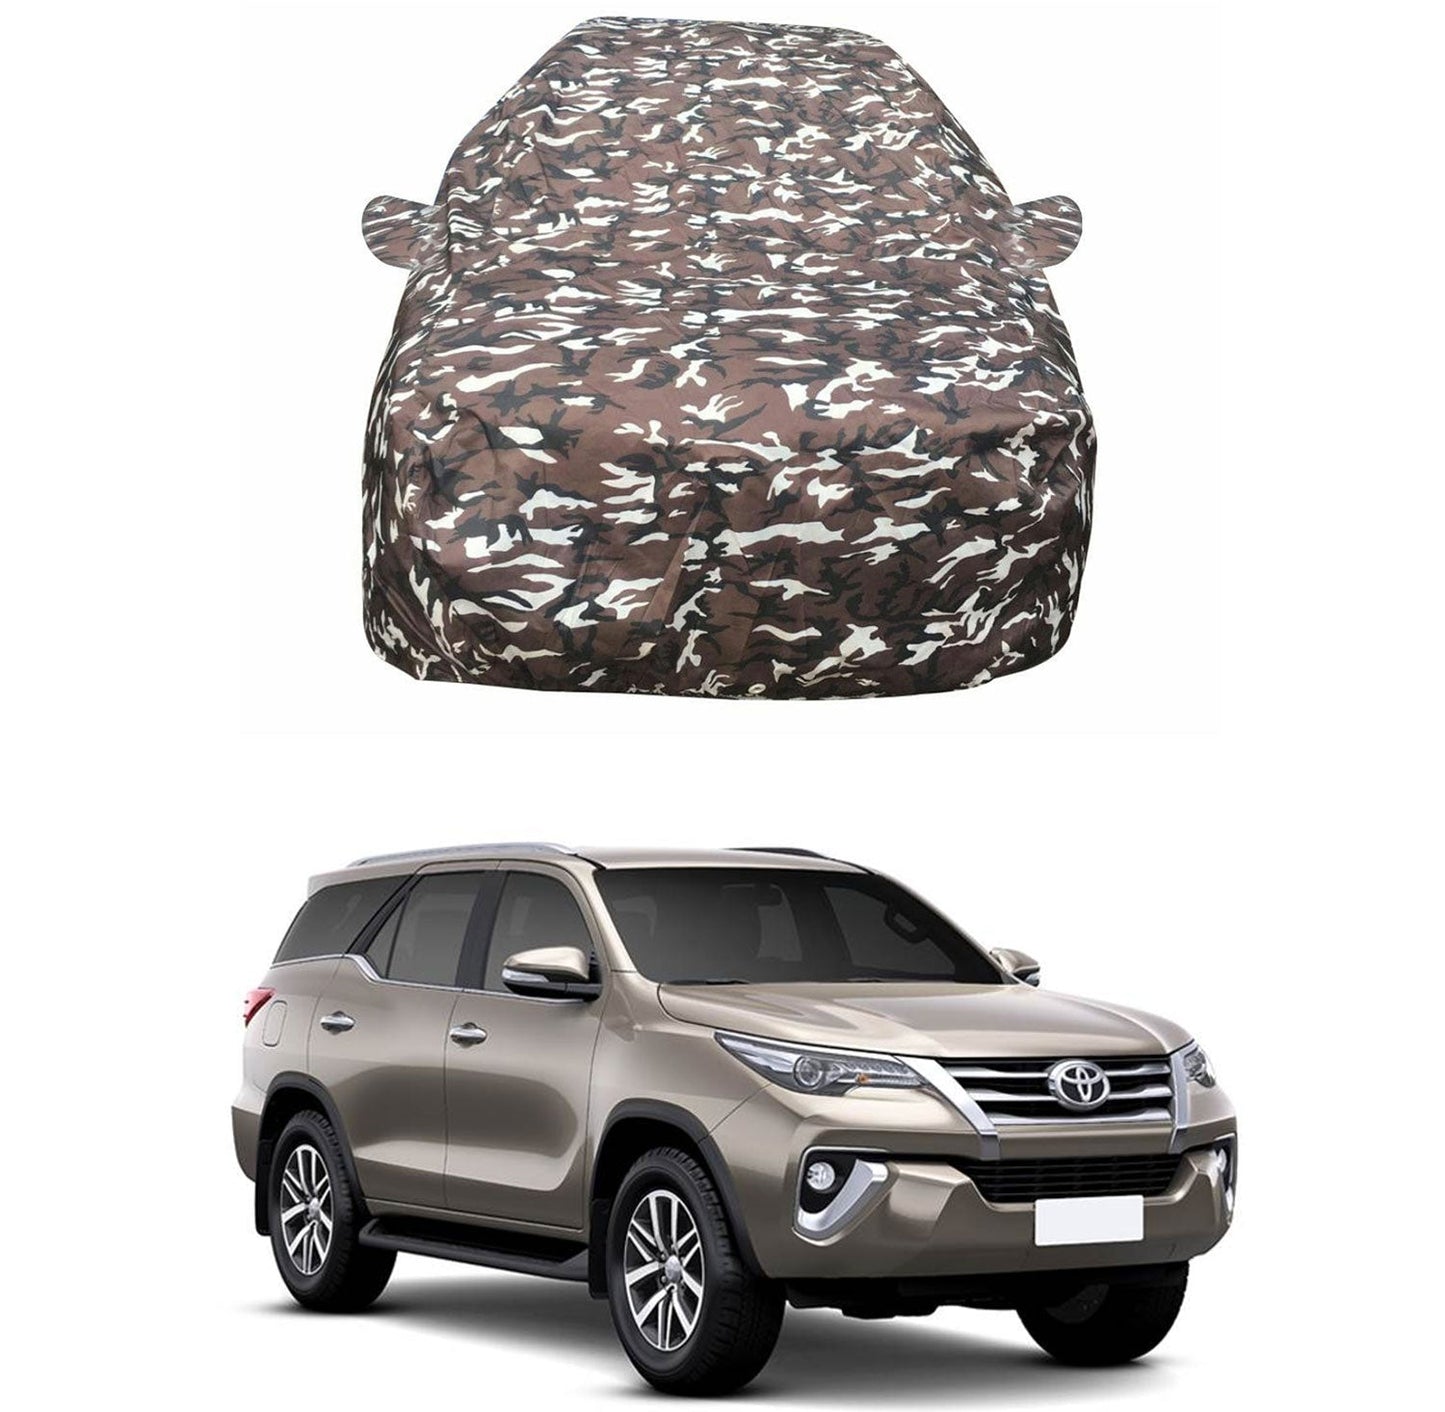 Oshotto Ranger Design Made of 100% Waterproof Fabric Car Body Cover with Mirror Pockets For Toyota Urban Cruiser